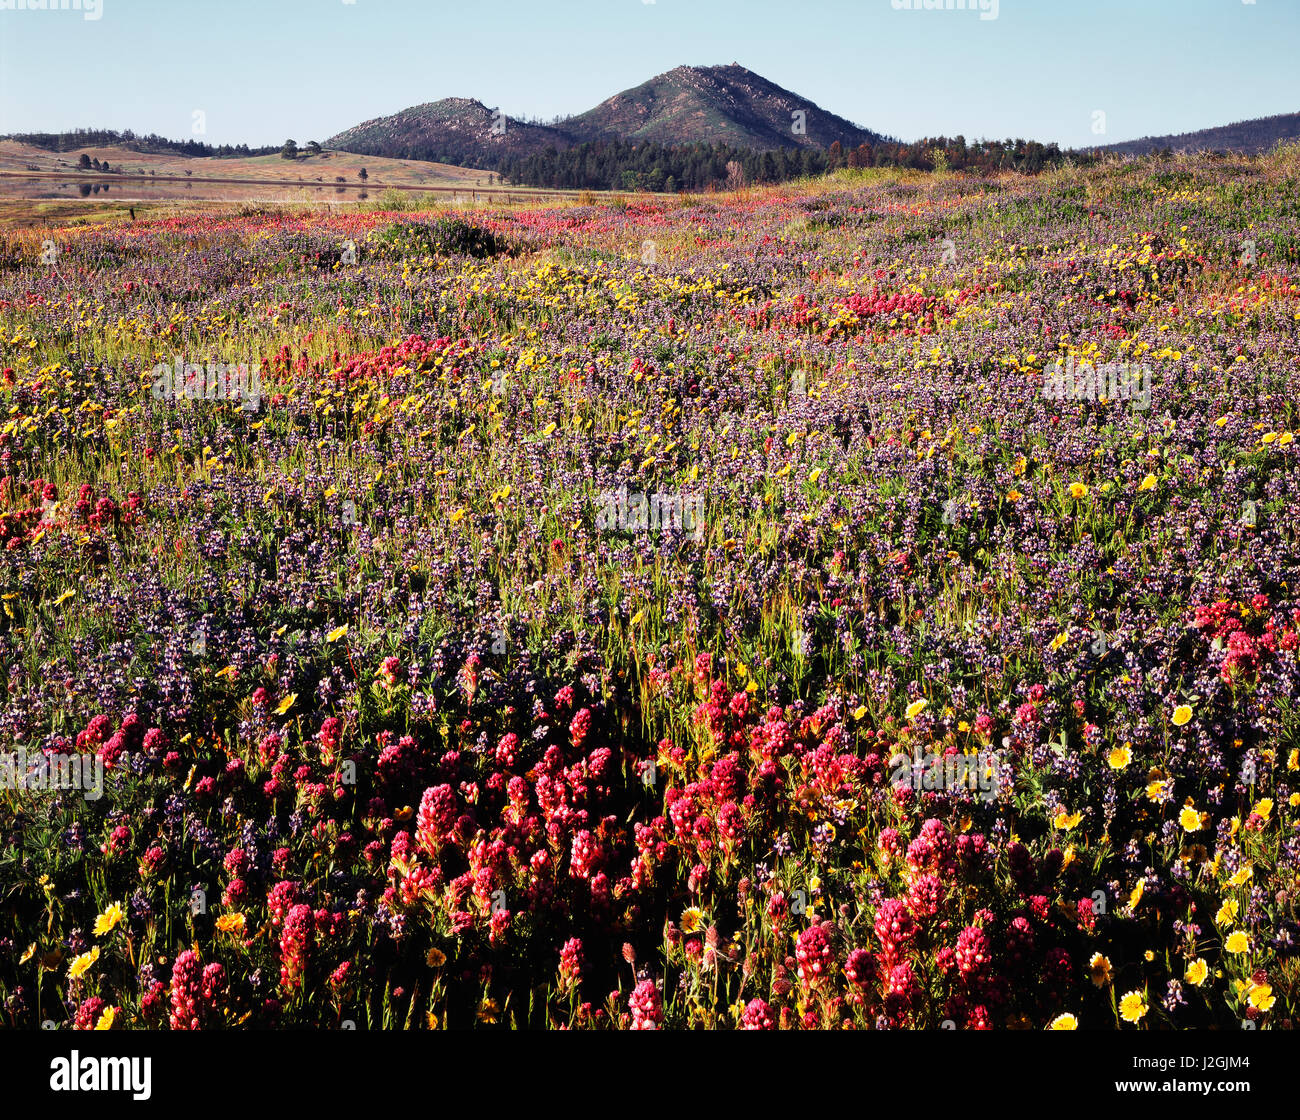 USA, California, Cleveland National Forest, A field of Owl's Clover (Castilleja exserta) and Lupine (Lupinus) wildflowers after the massive Cedar Wildfire and torrential rains. (Large format sizes available) Stock Photo